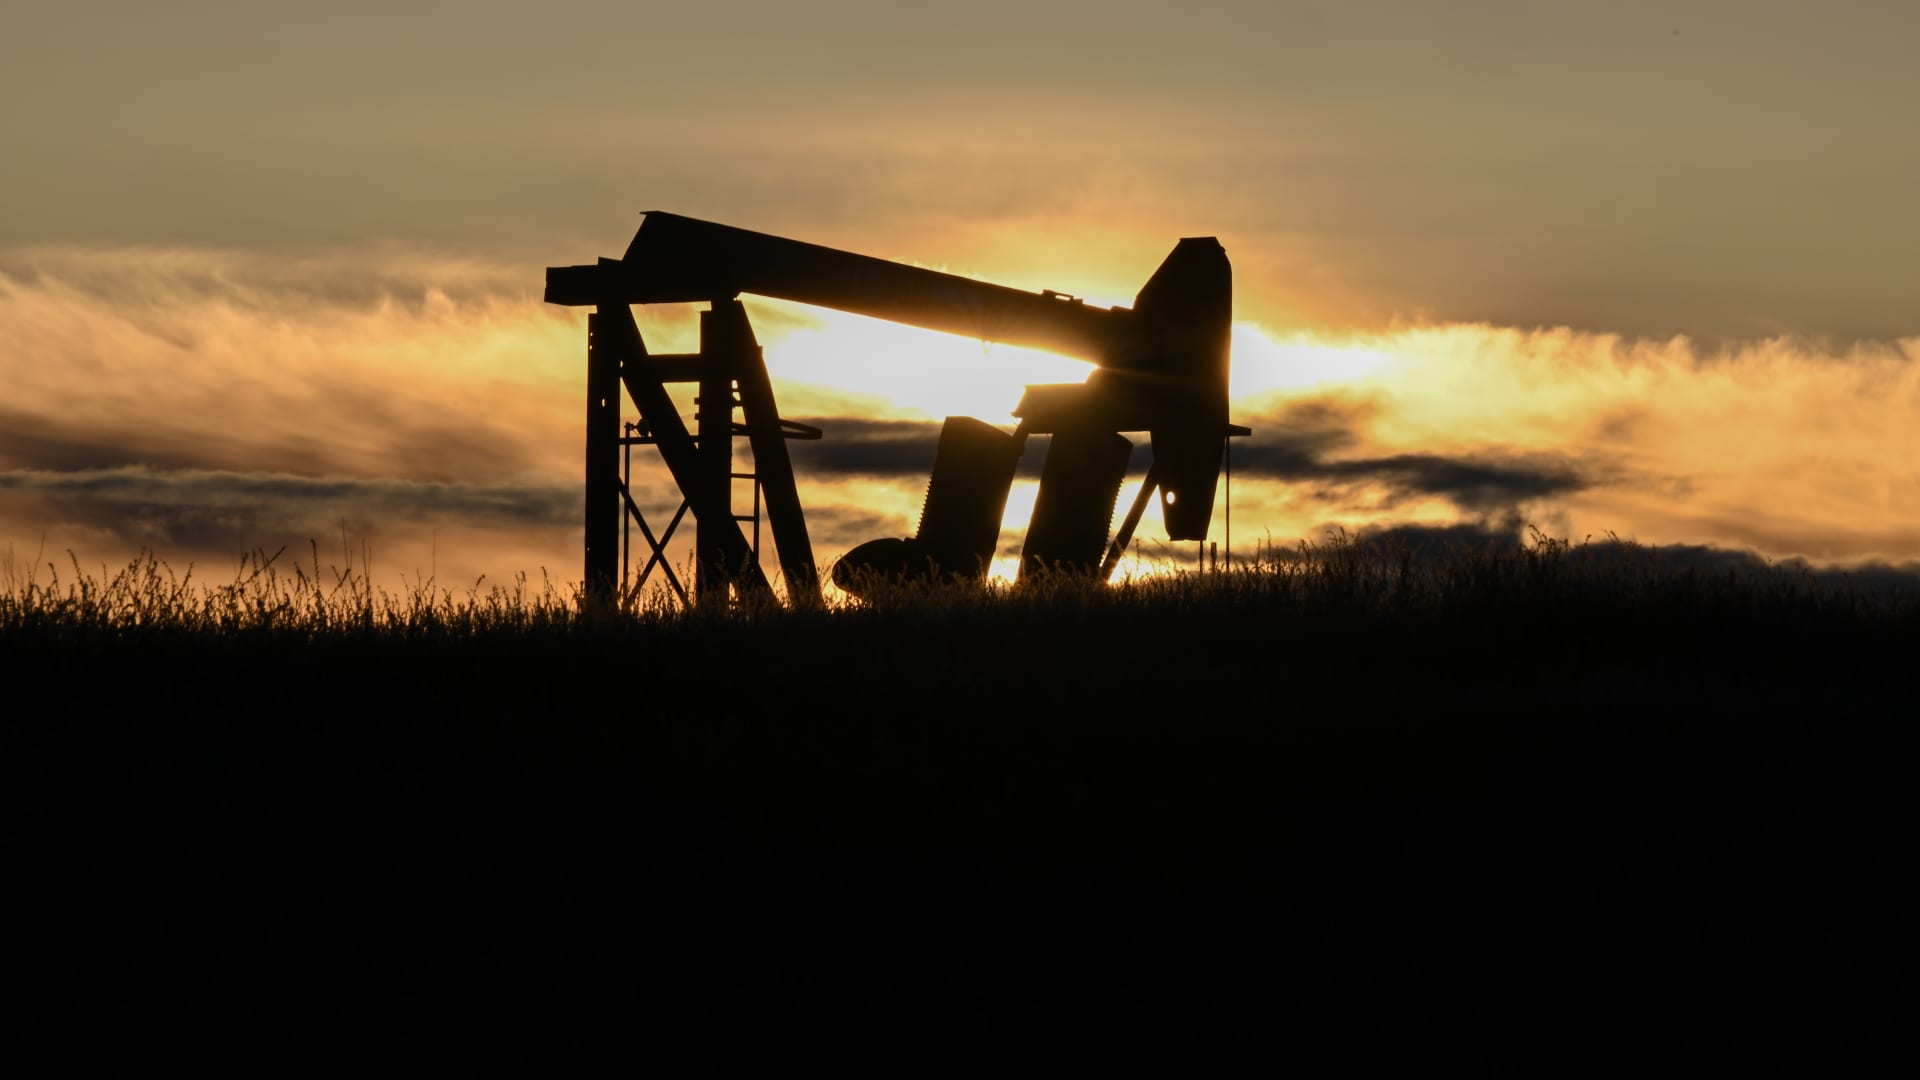 Image of an oil well in action during sunset in the Elk Hills Oil Field, California